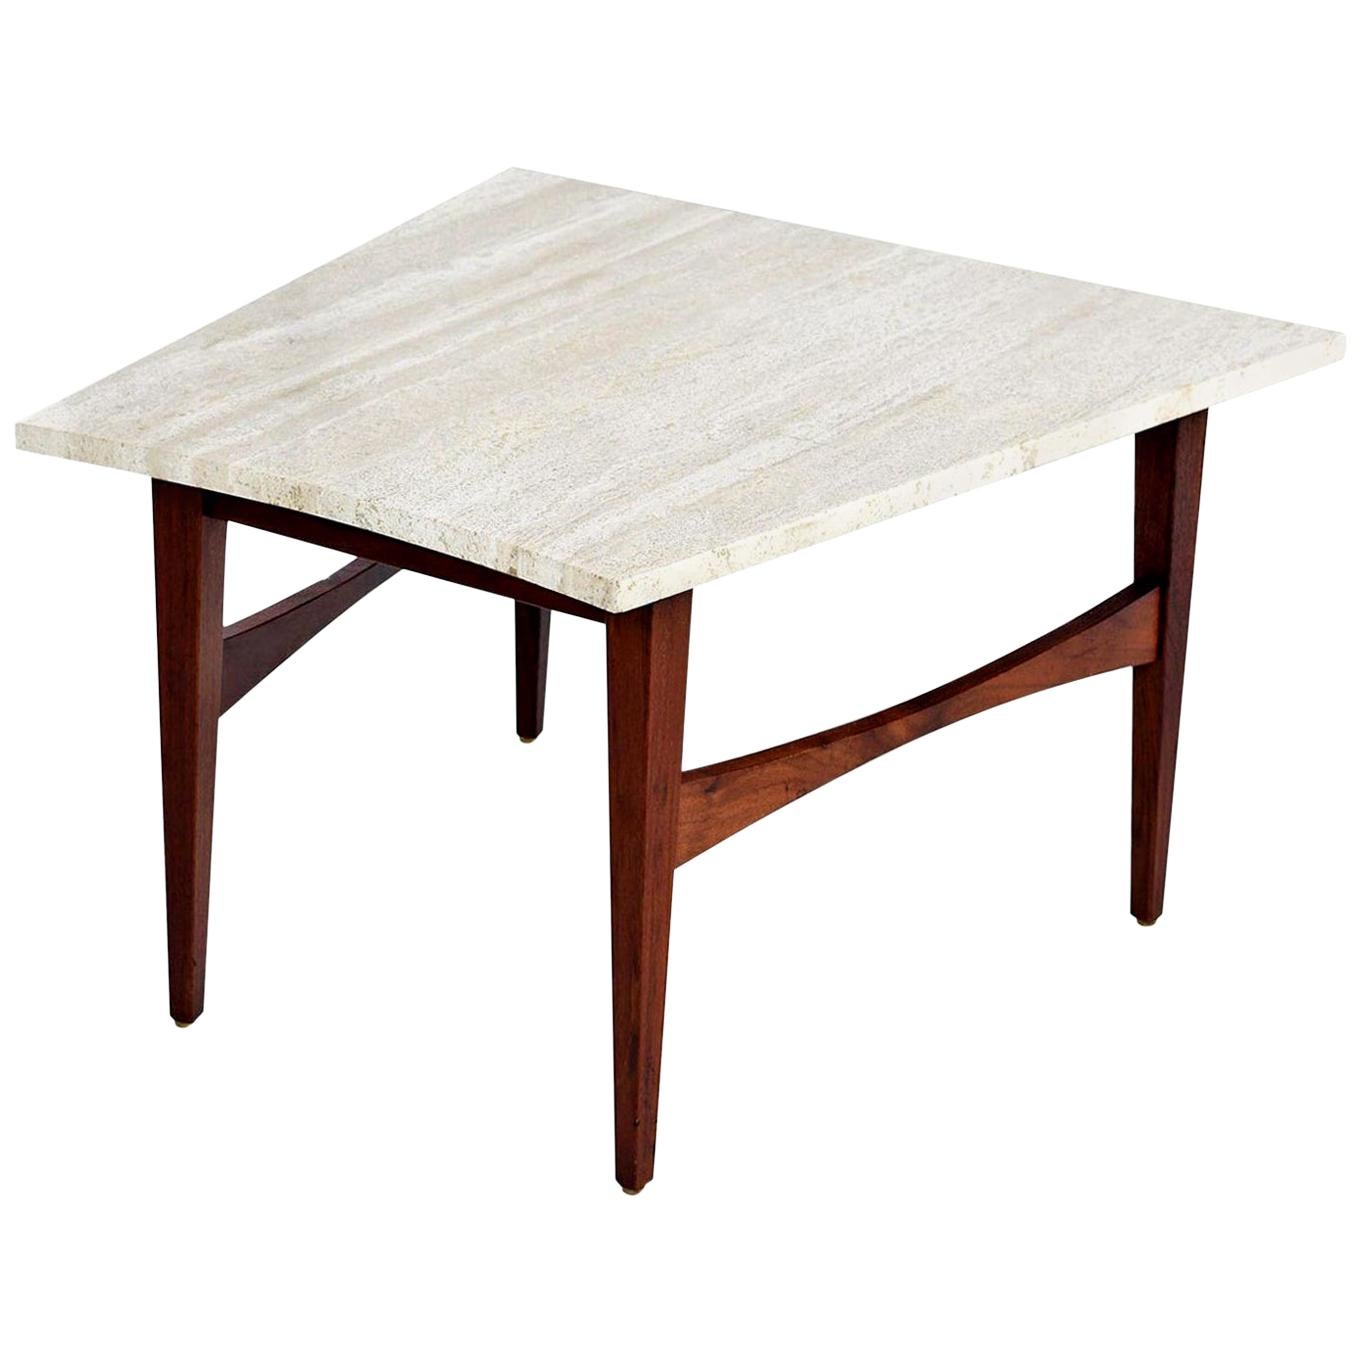 Mid-Century Modern Jens Risom Style Wedge Travertine and Walnut Side Table